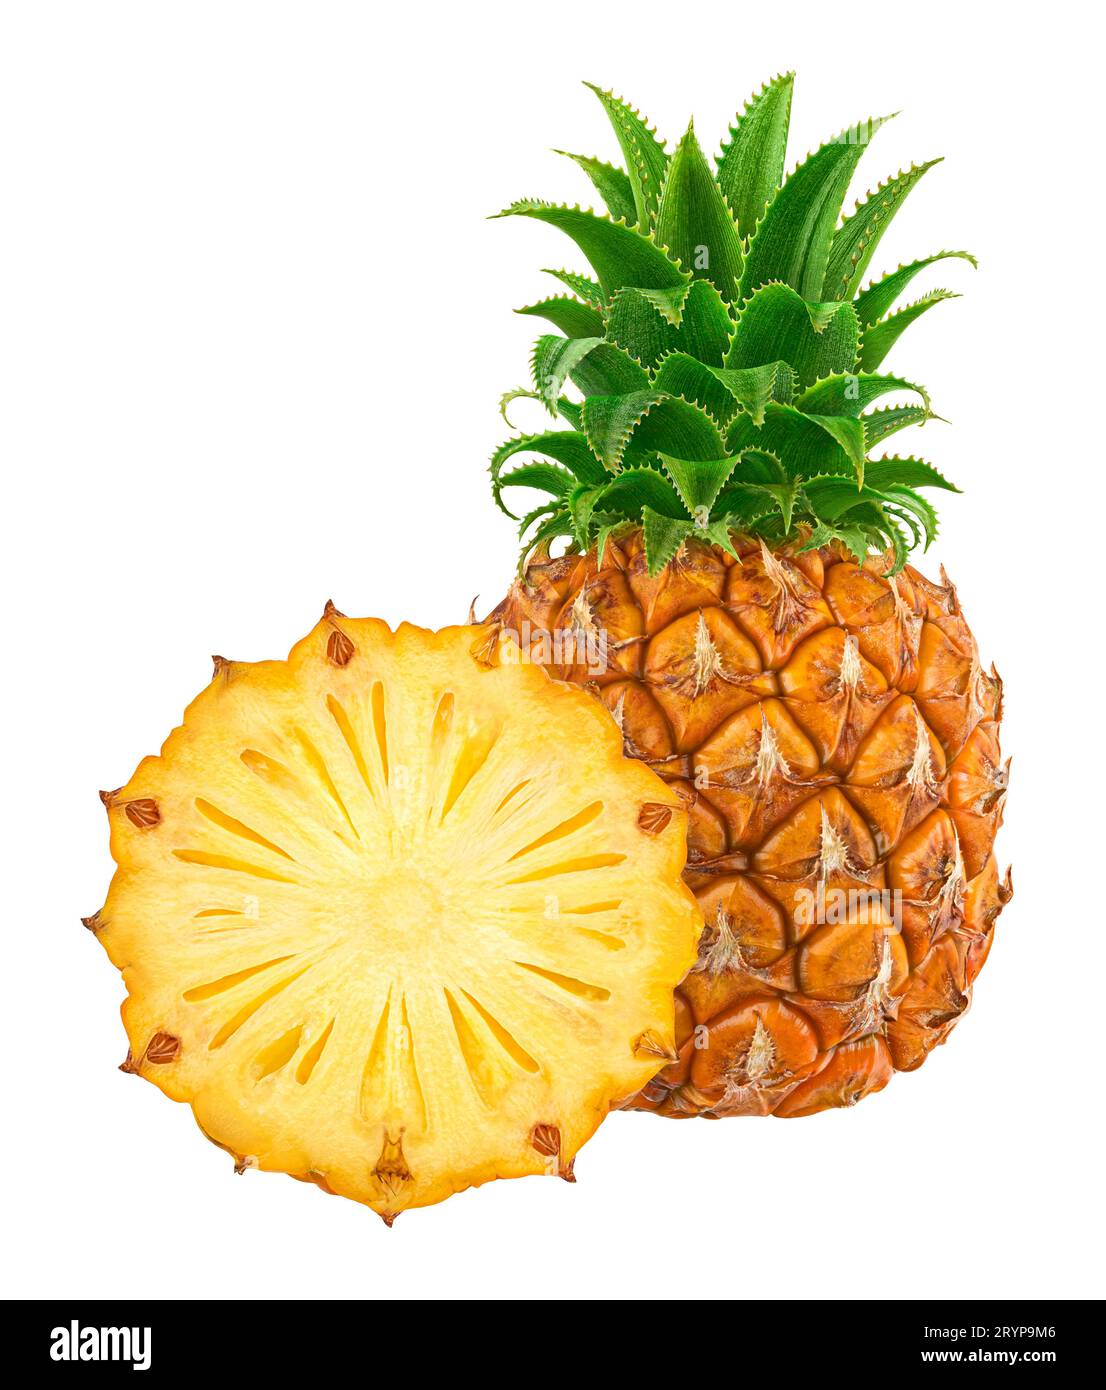 Pineapple isolated on white background, full depth of field Stock Photo